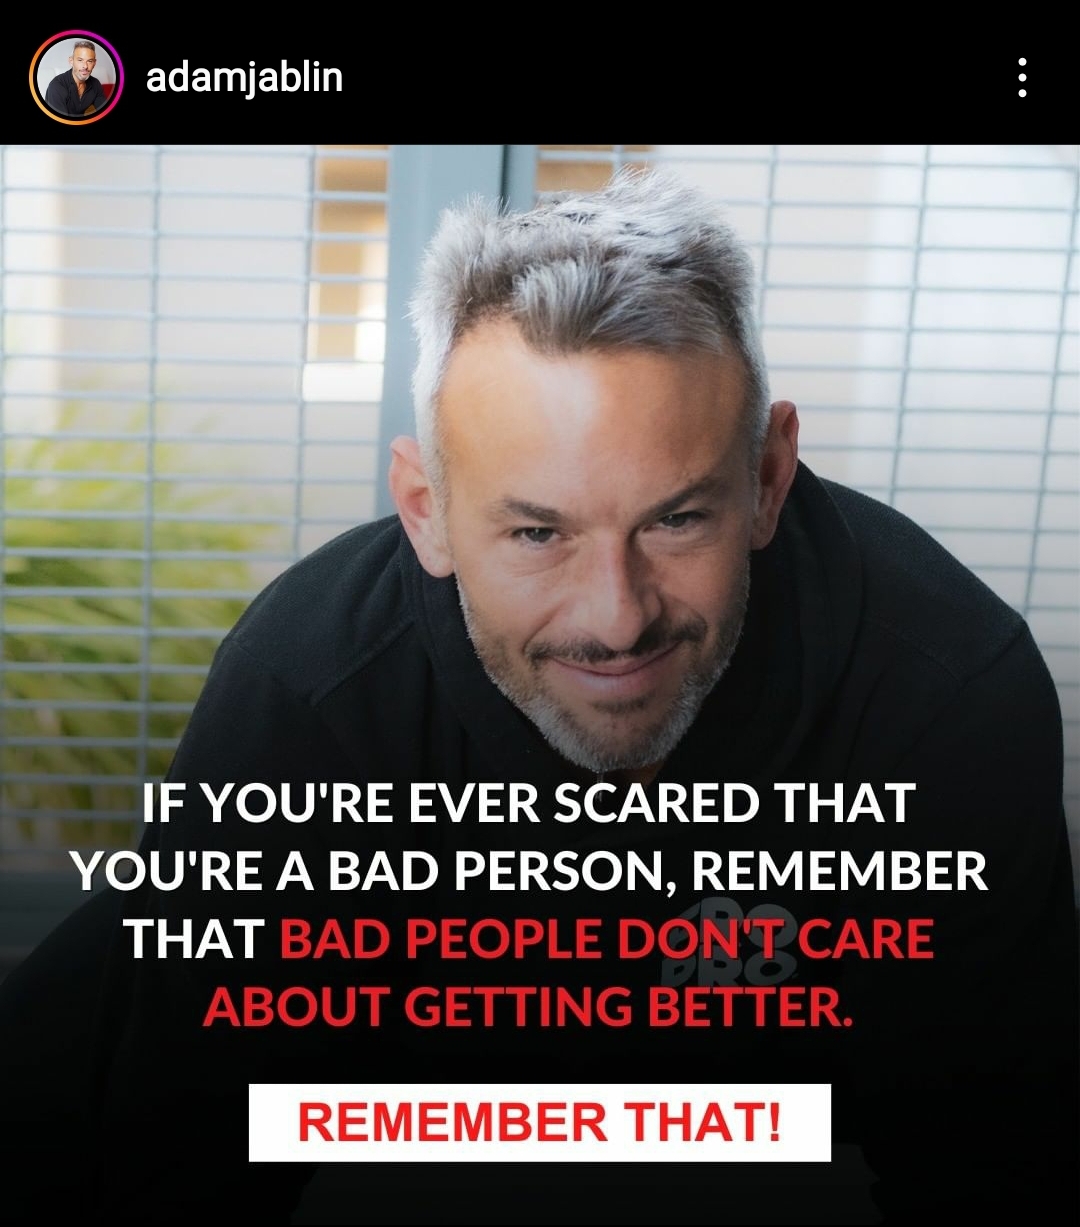 If you're ever scared that you're a bad person, remember that bad people don't care about getting better. Remember that! Adam Joblin, coaching tip